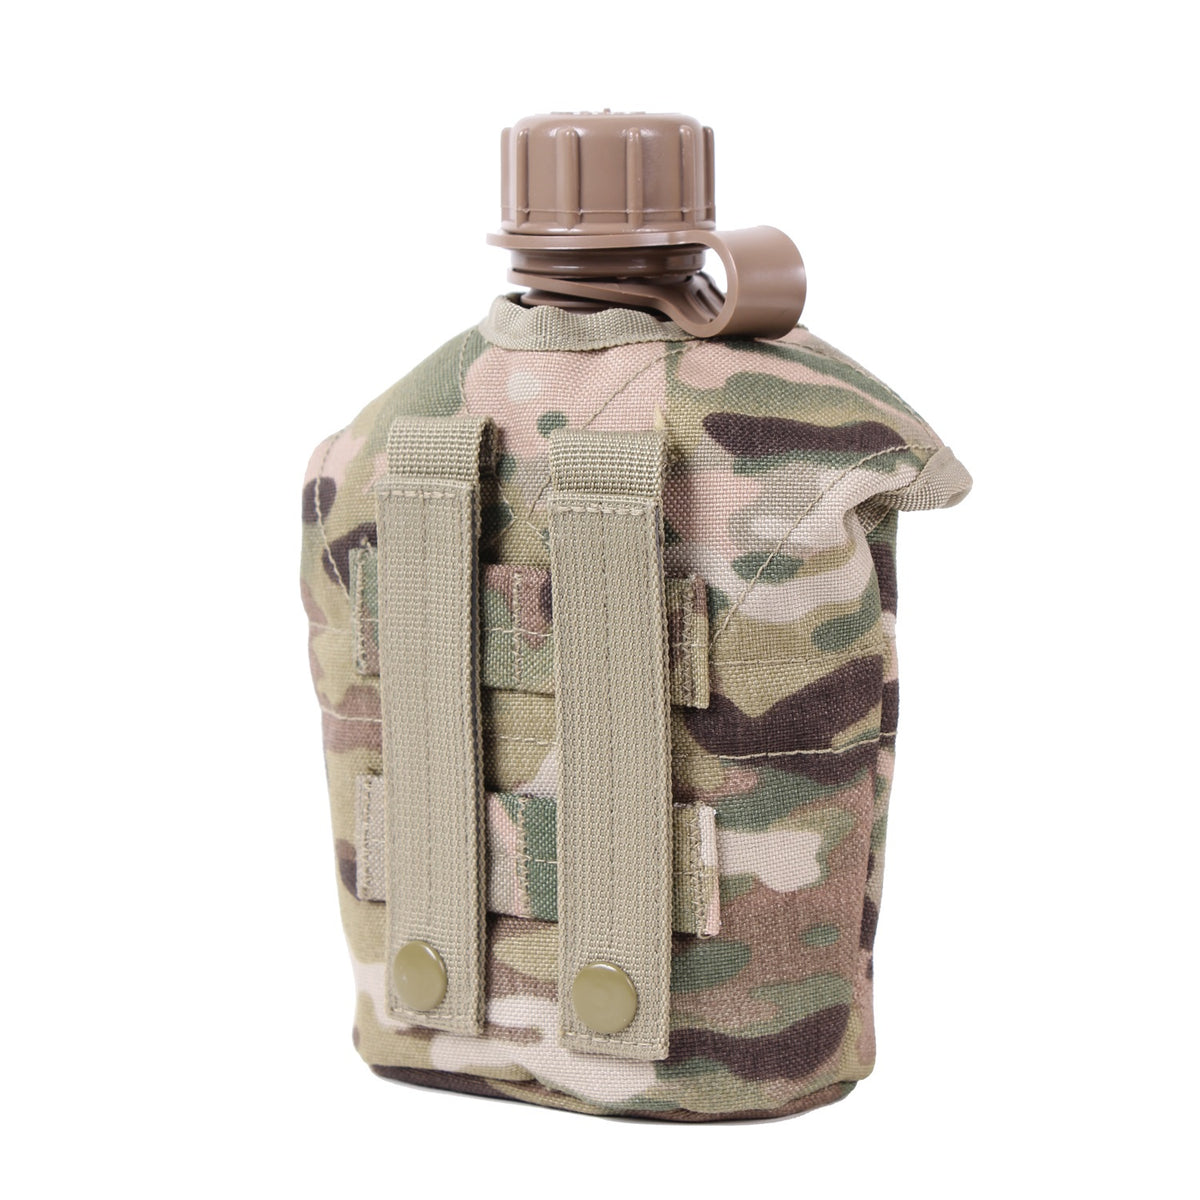 Rothco GI Style MOLLE Canteen Cover Multicam